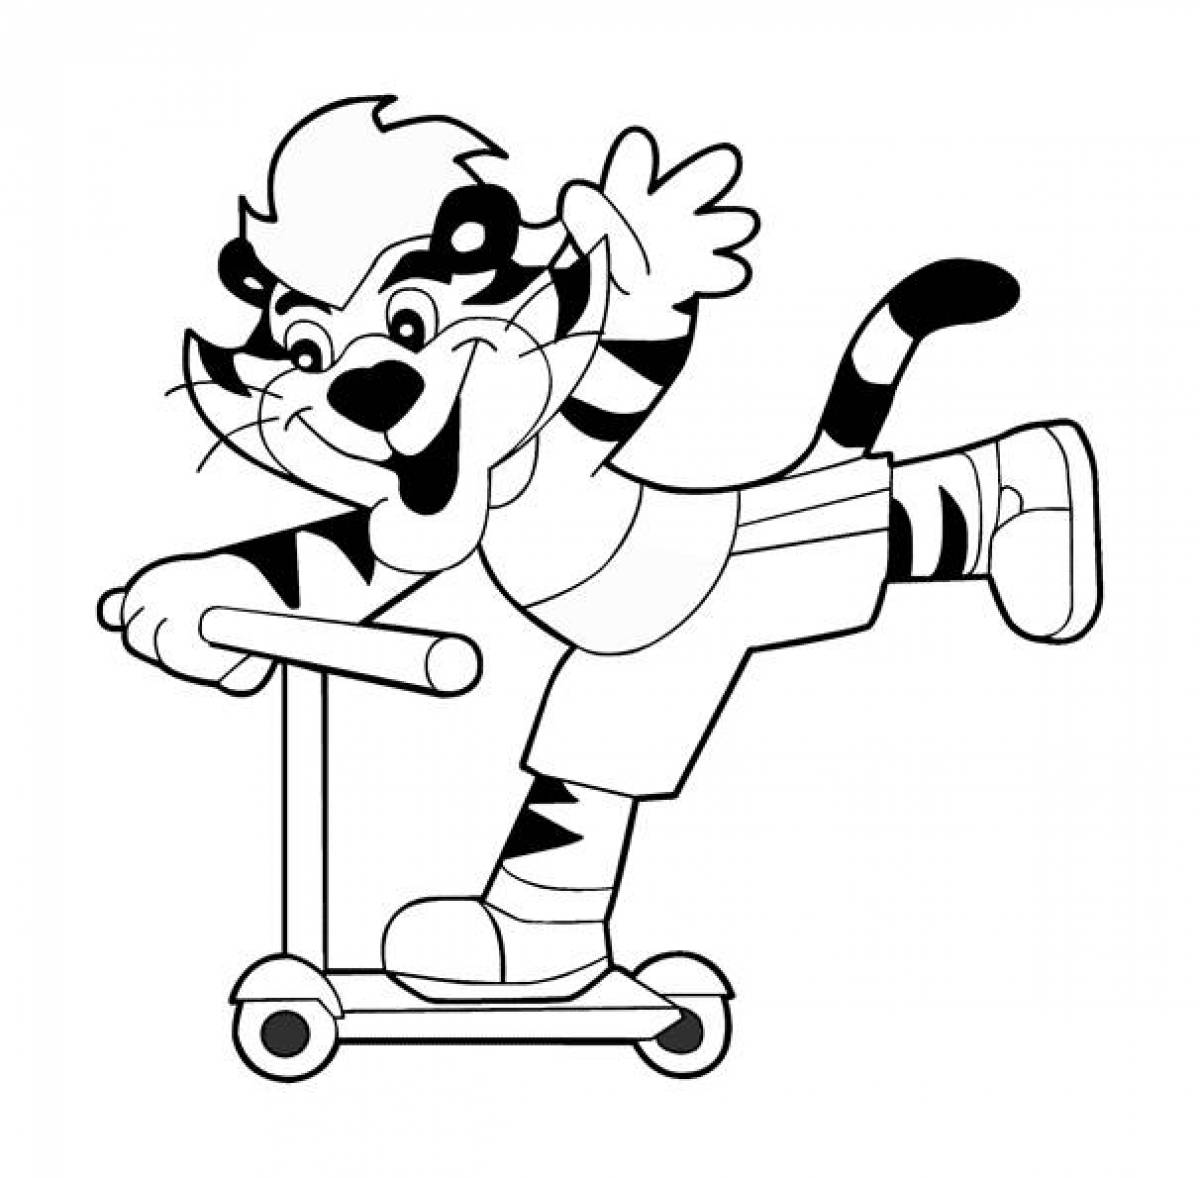 Tiger cub on a scooter